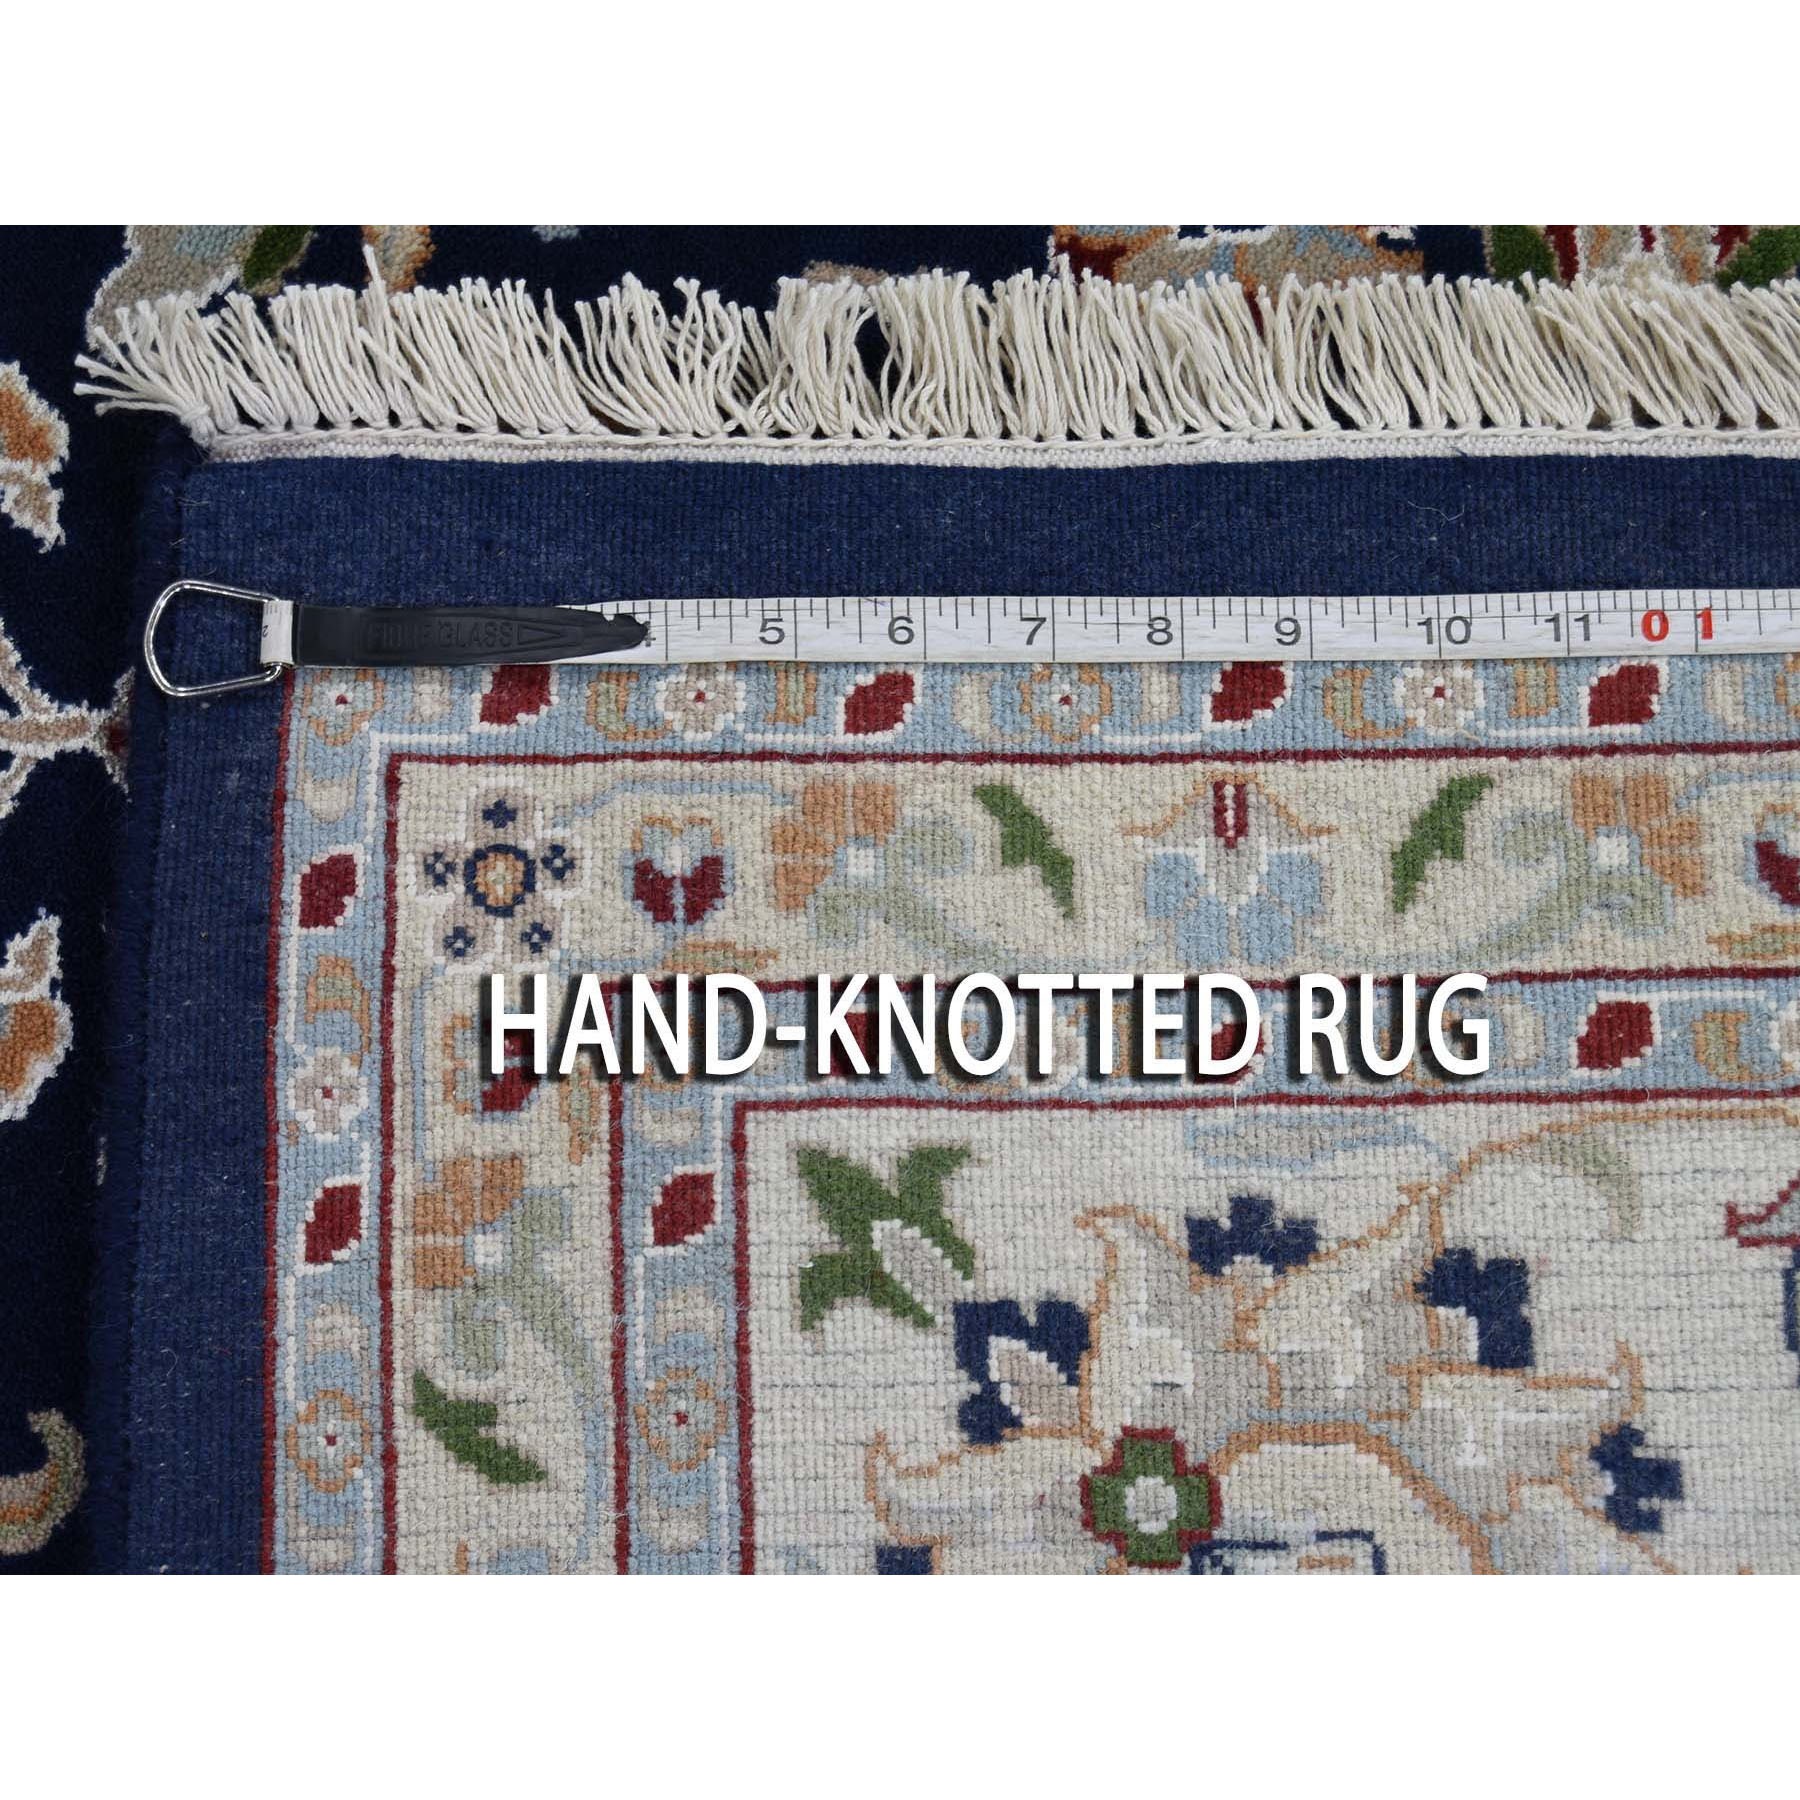 9-x11-9  Wool And Silk 250 KPSI All Over Design Navy Blue Nain Hand Knotted Oriental Rug 